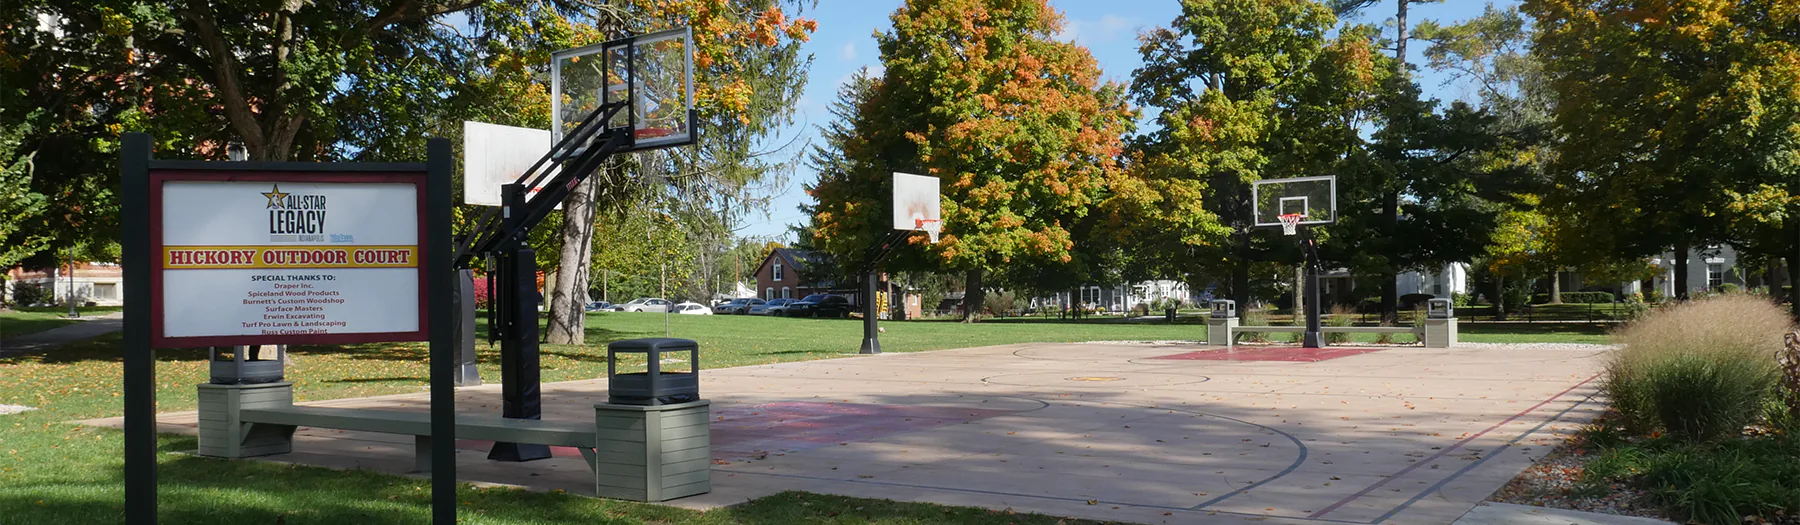 Draper Titan Ajustable Post basketball backstops at the Hickory Outdoor Court, Knightstown, IN.